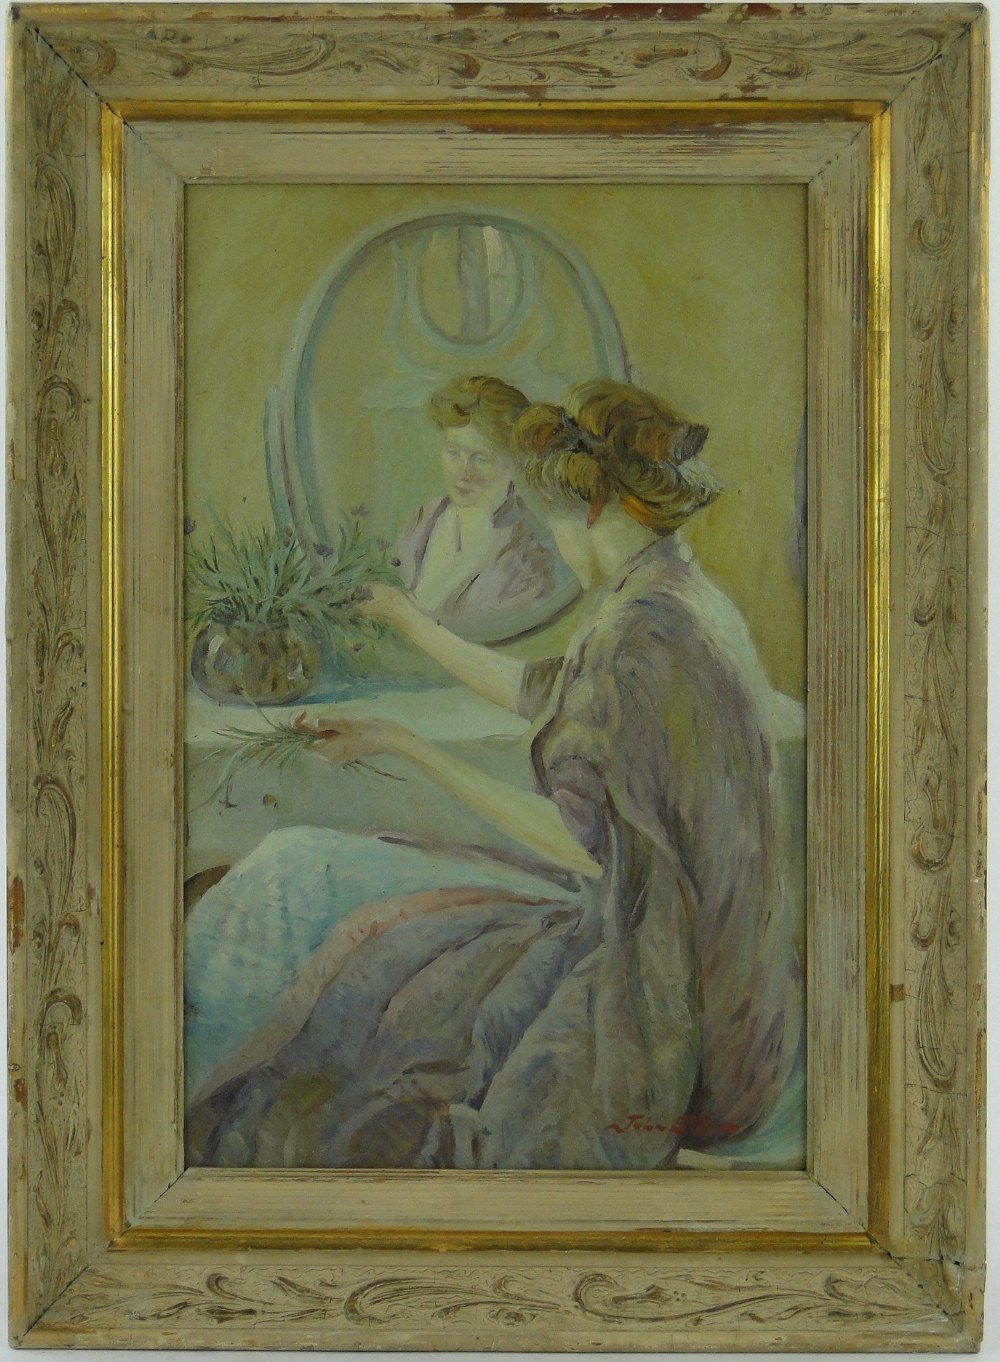 Early 20th century oil on board, woman arranging flowers, indistinctly signed, 20.5" x 13", framed.